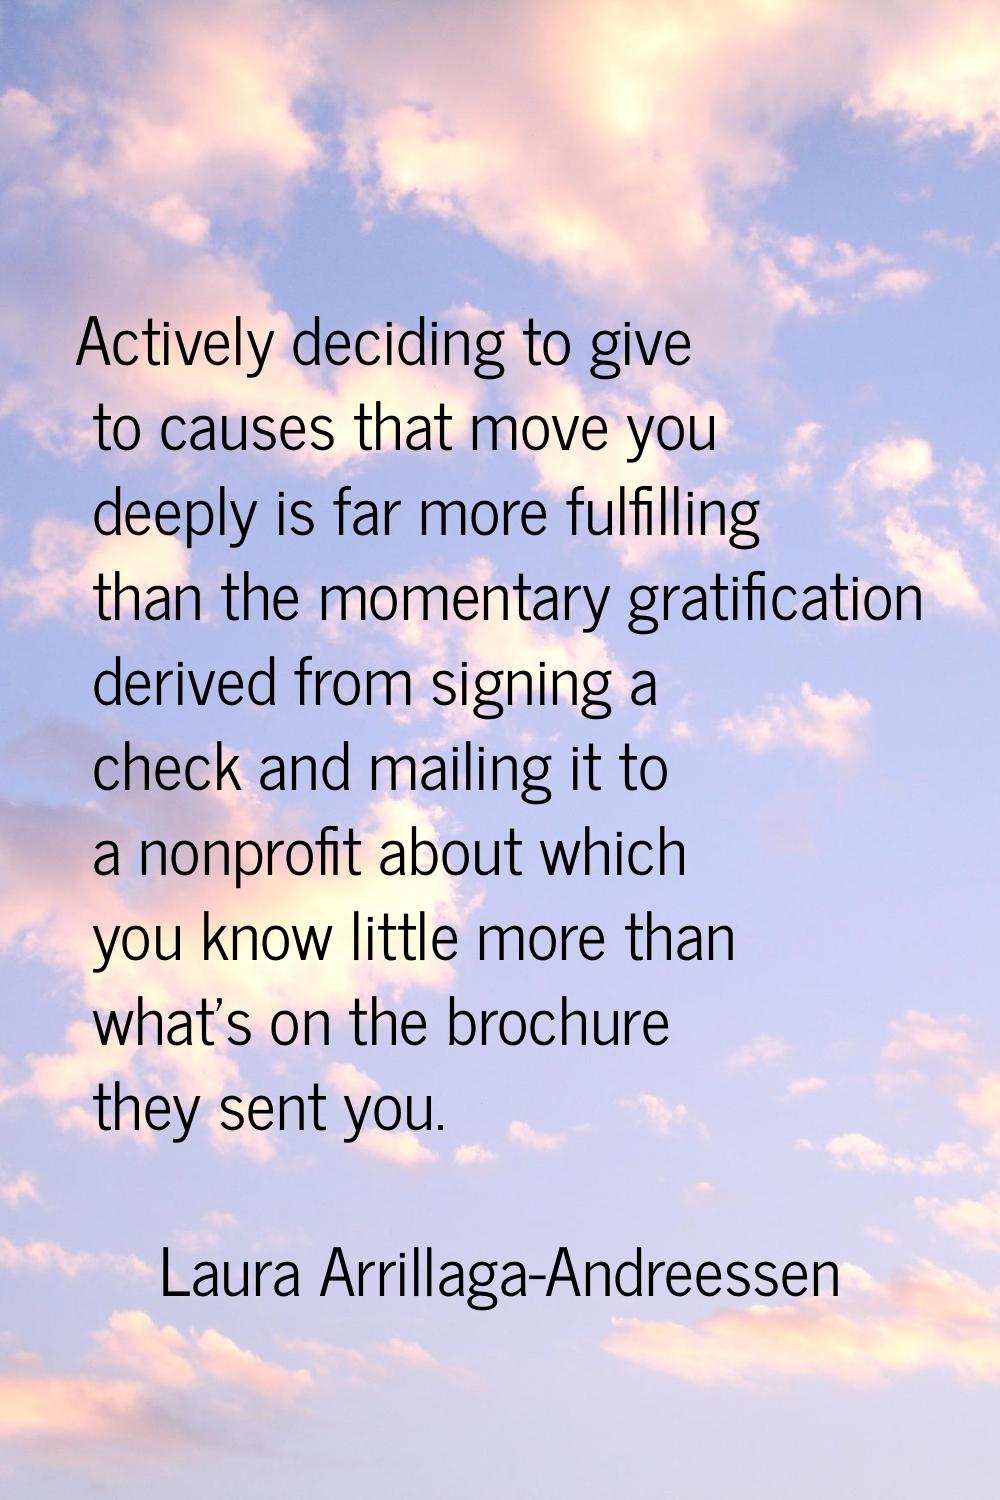 Actively deciding to give to causes that move you deeply is far more fulfilling than the momentary 